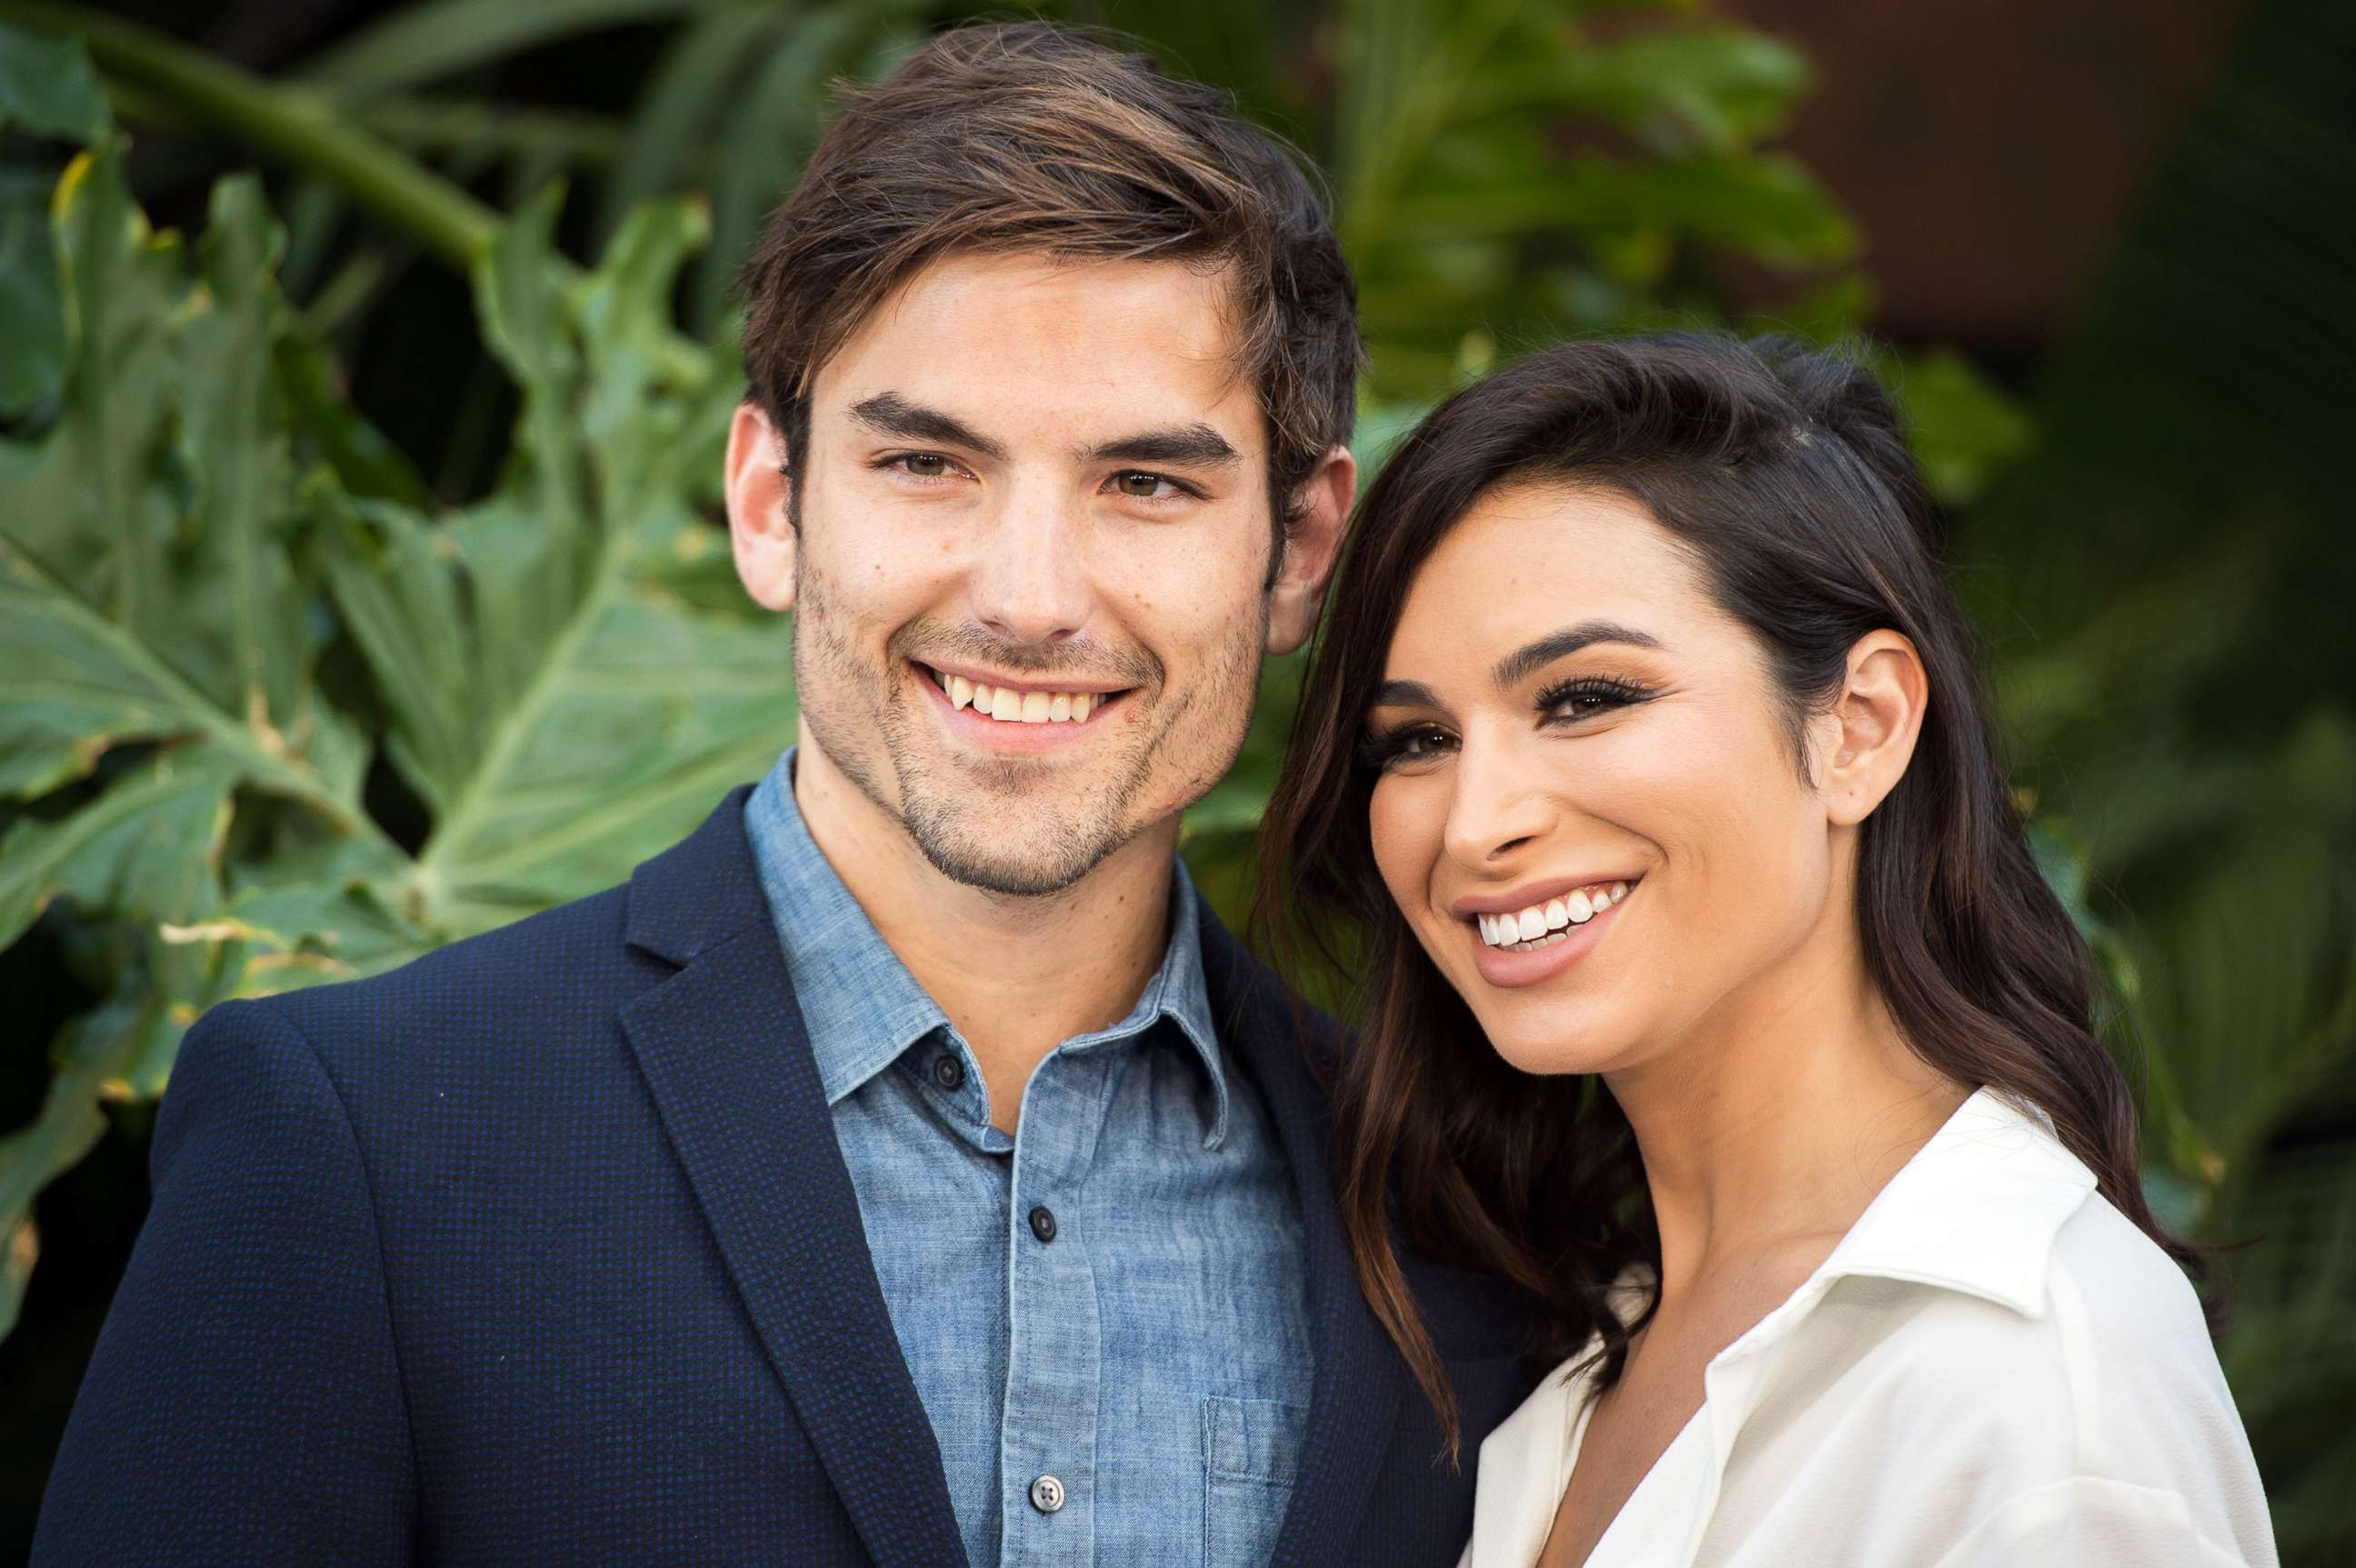 PHOTO: "Bachelor In Paradise" contestants Jared Haibon and  Ashley Iaconetti attend the premiere of "Jurassic World: Fallen Kingdom" on June 12, 2018, in Los Angeles.